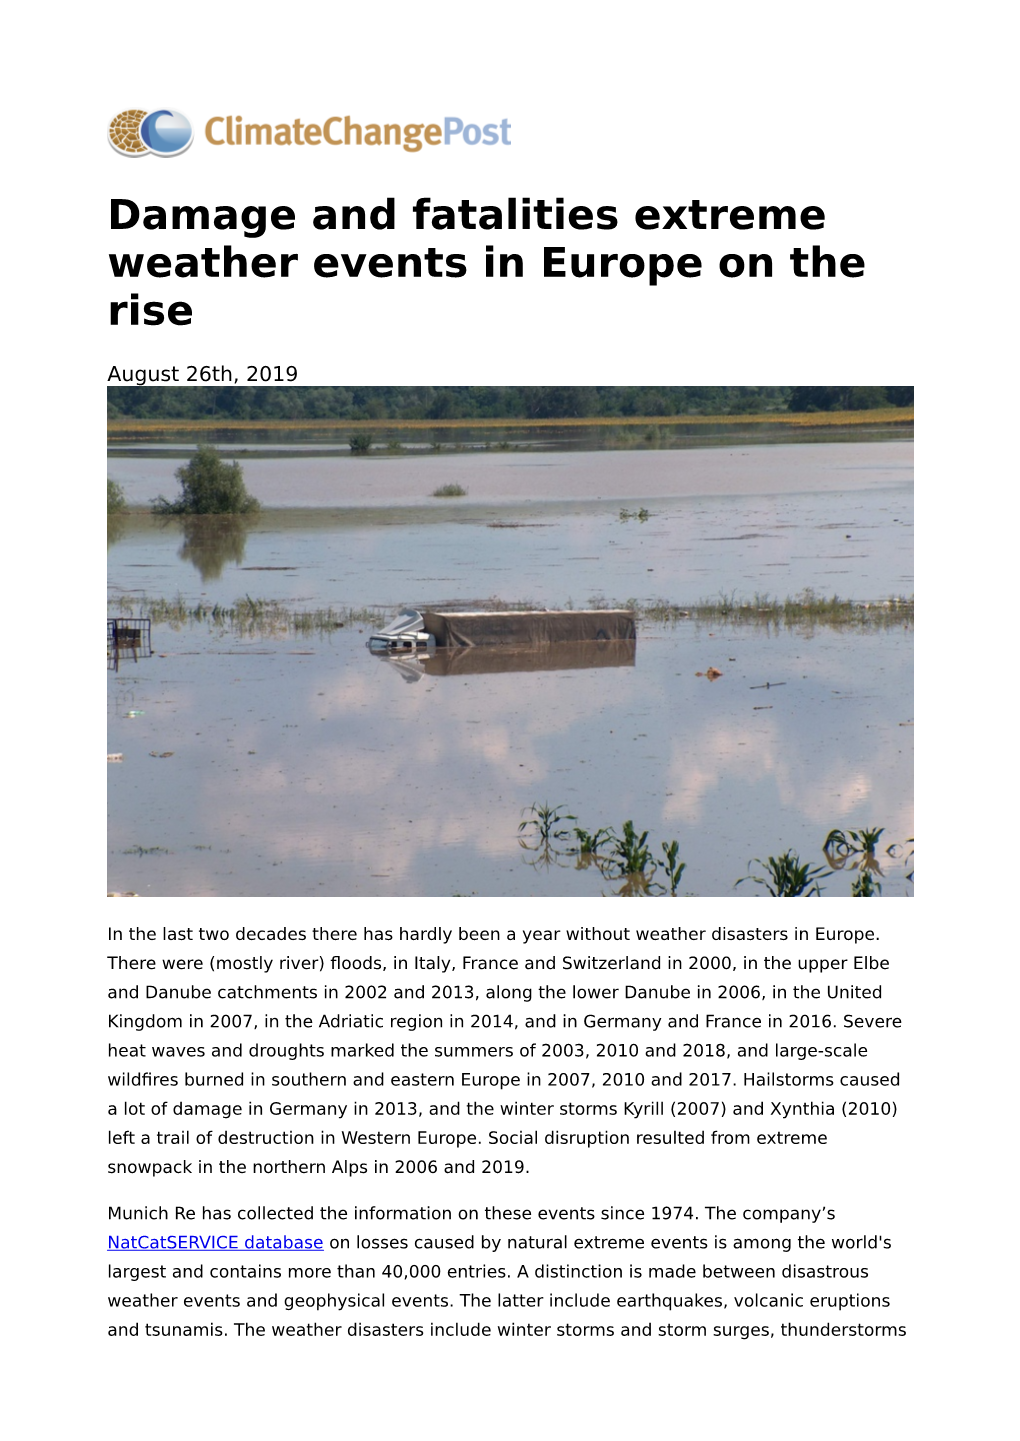 Damage and Fatalities Extreme Weather Events in Europe on the Rise